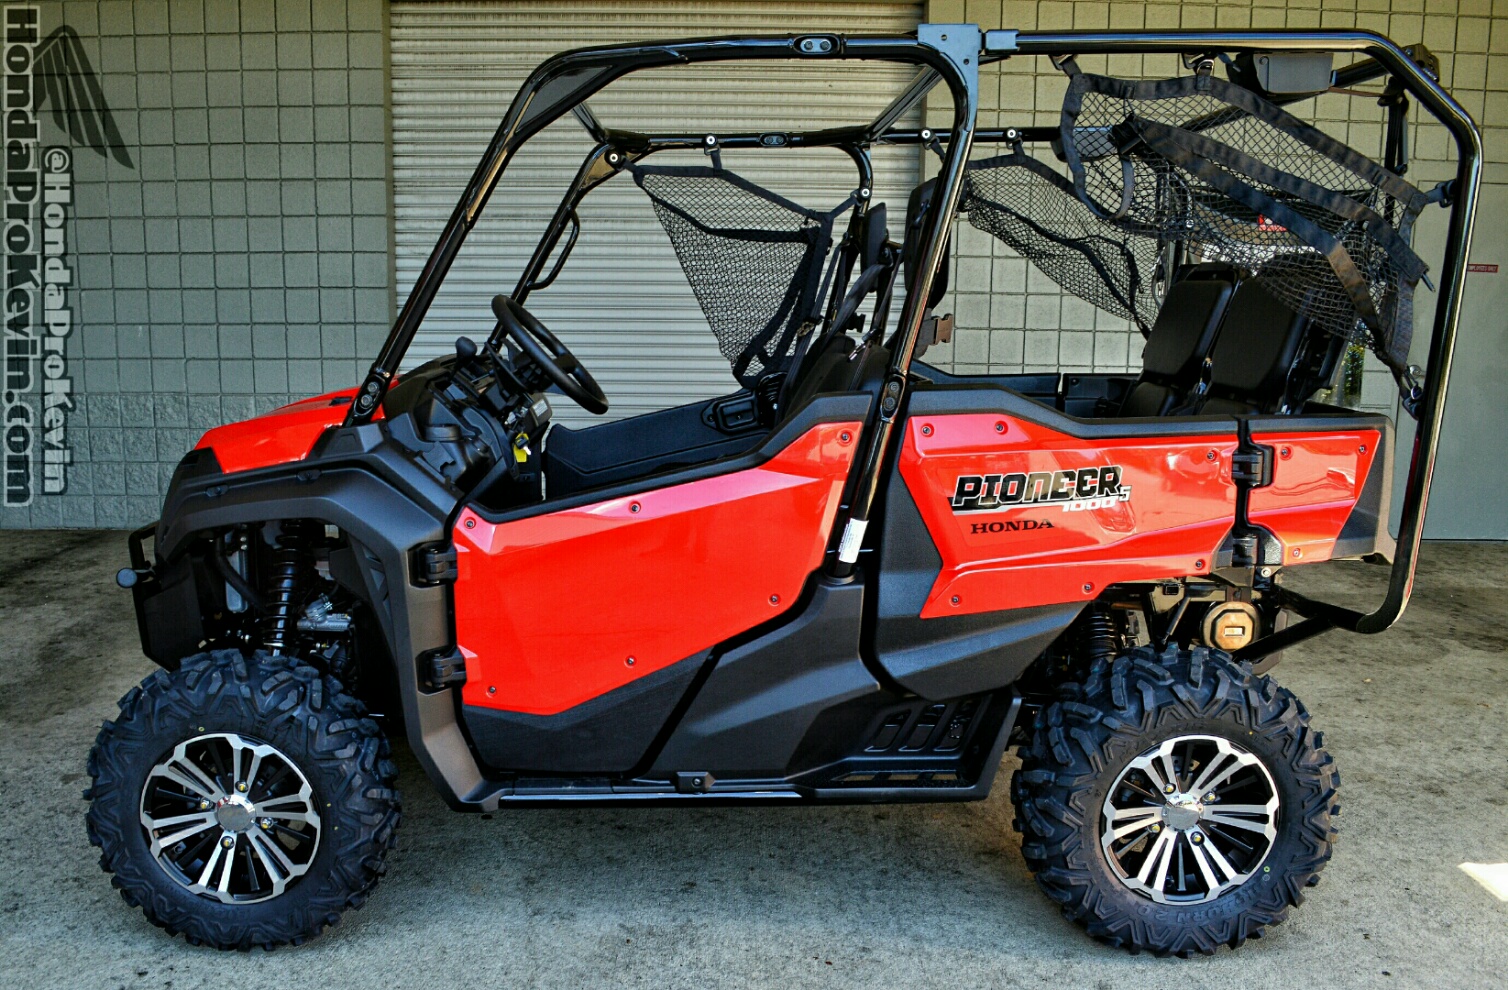 2016 Pioneer 1000 5 Drive Review All New Honda Side By Side Atv